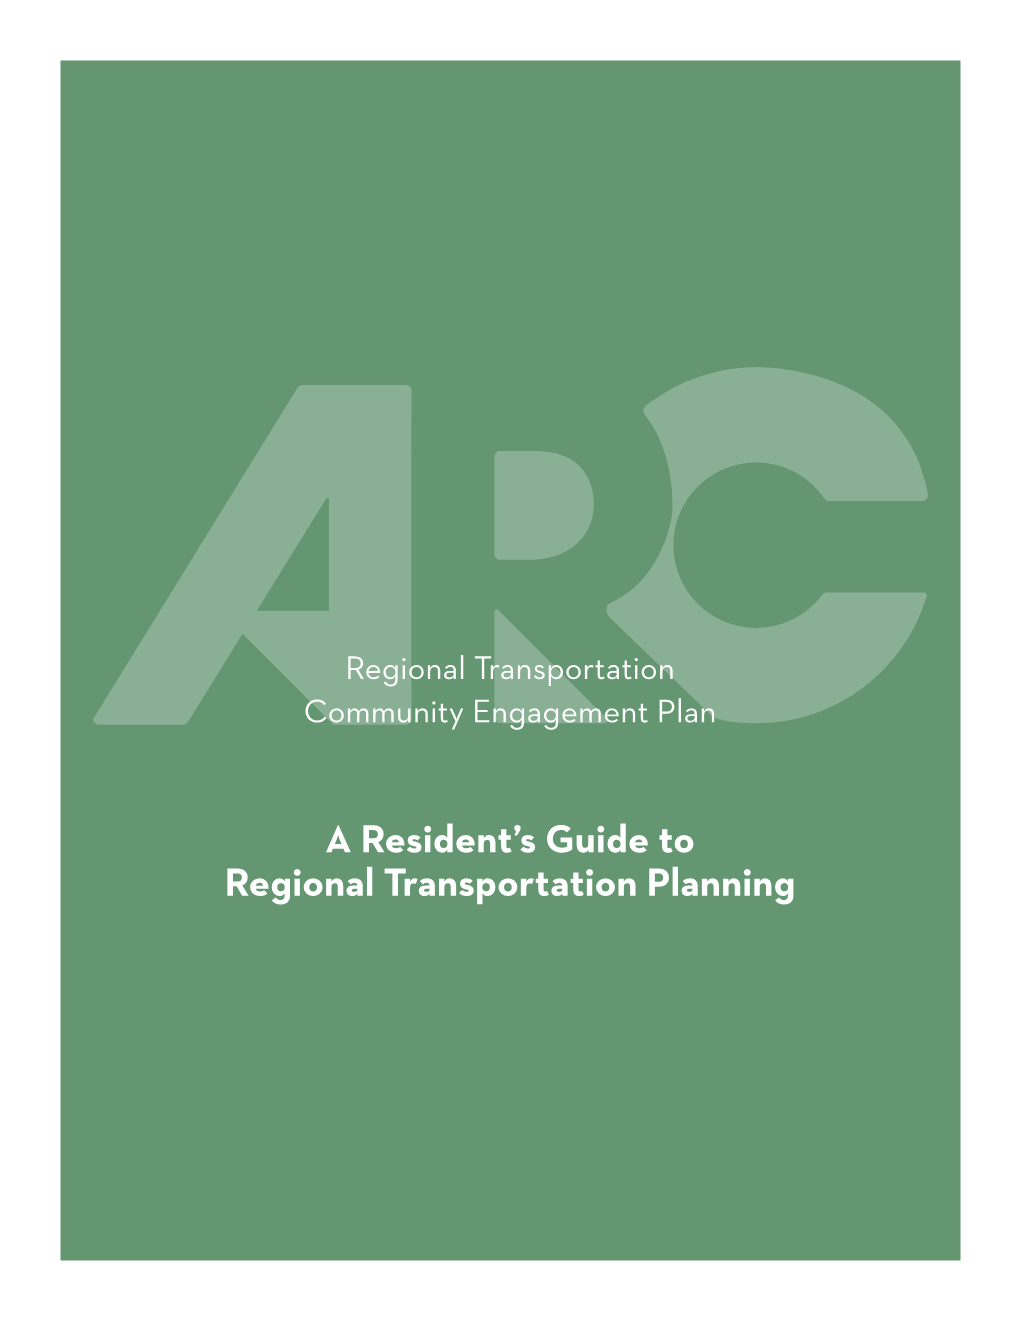 A Resident's Guide to Regional Transportation Planning